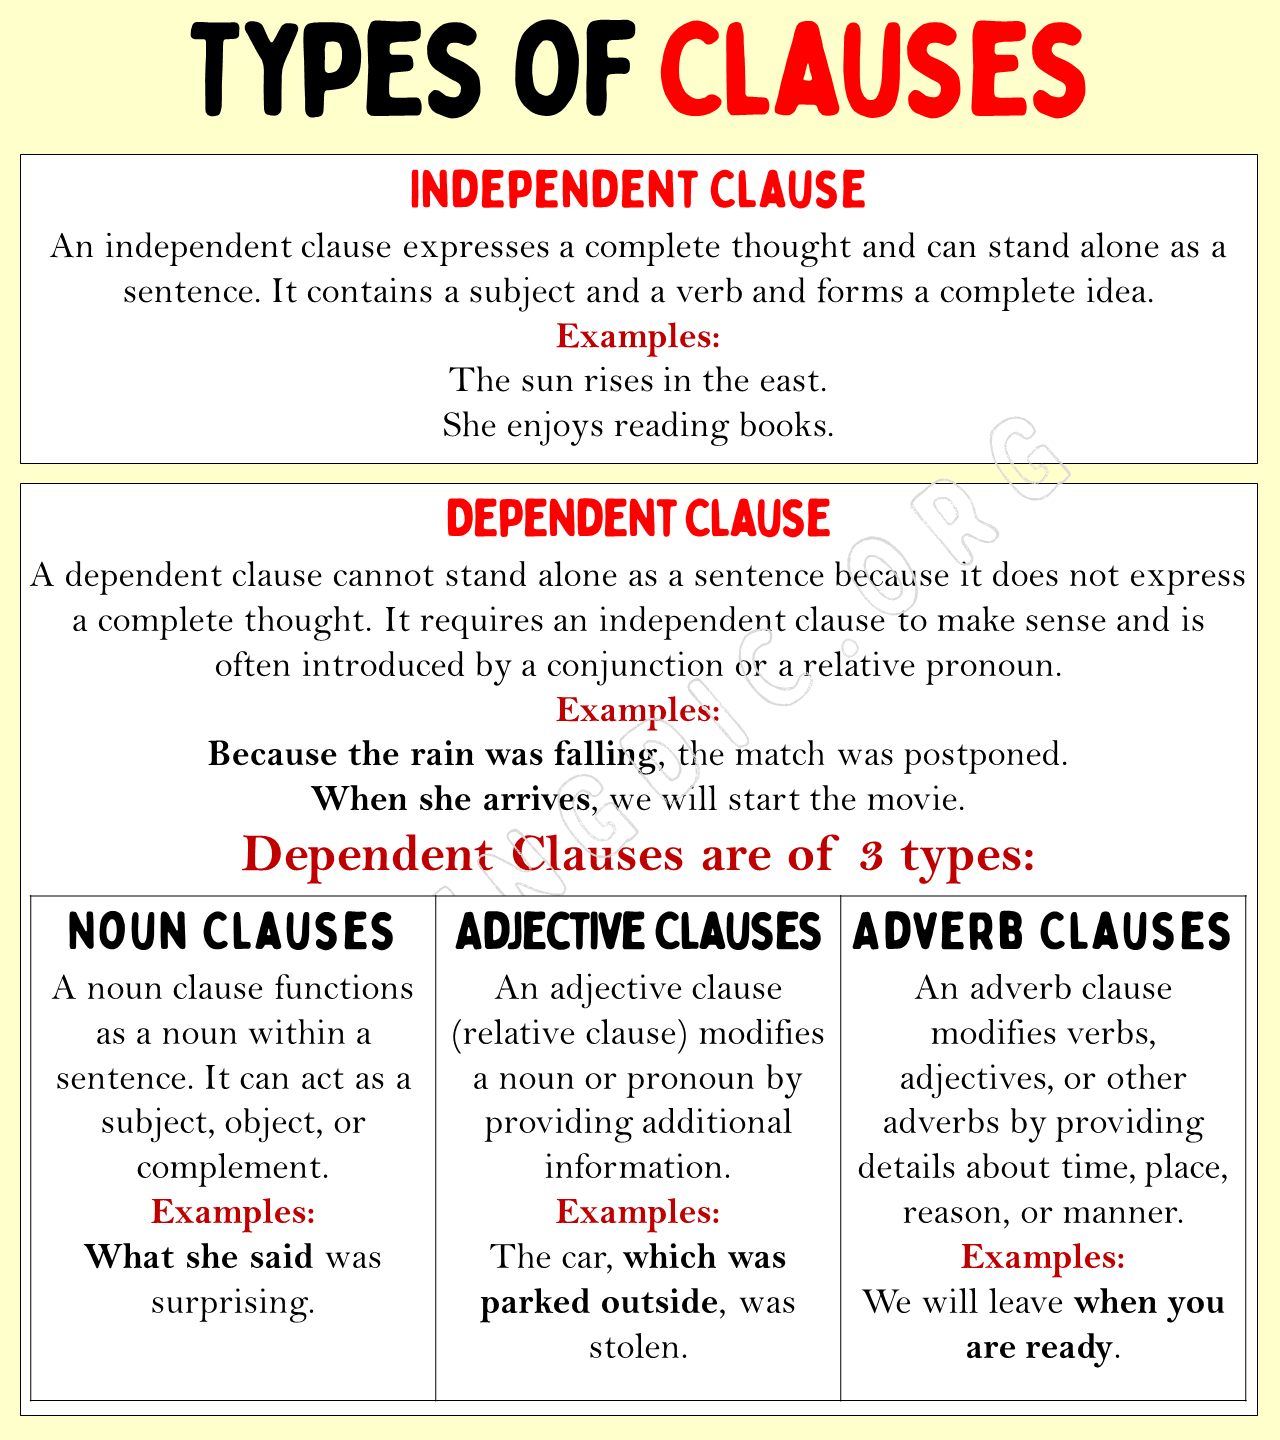 Types of Clauses